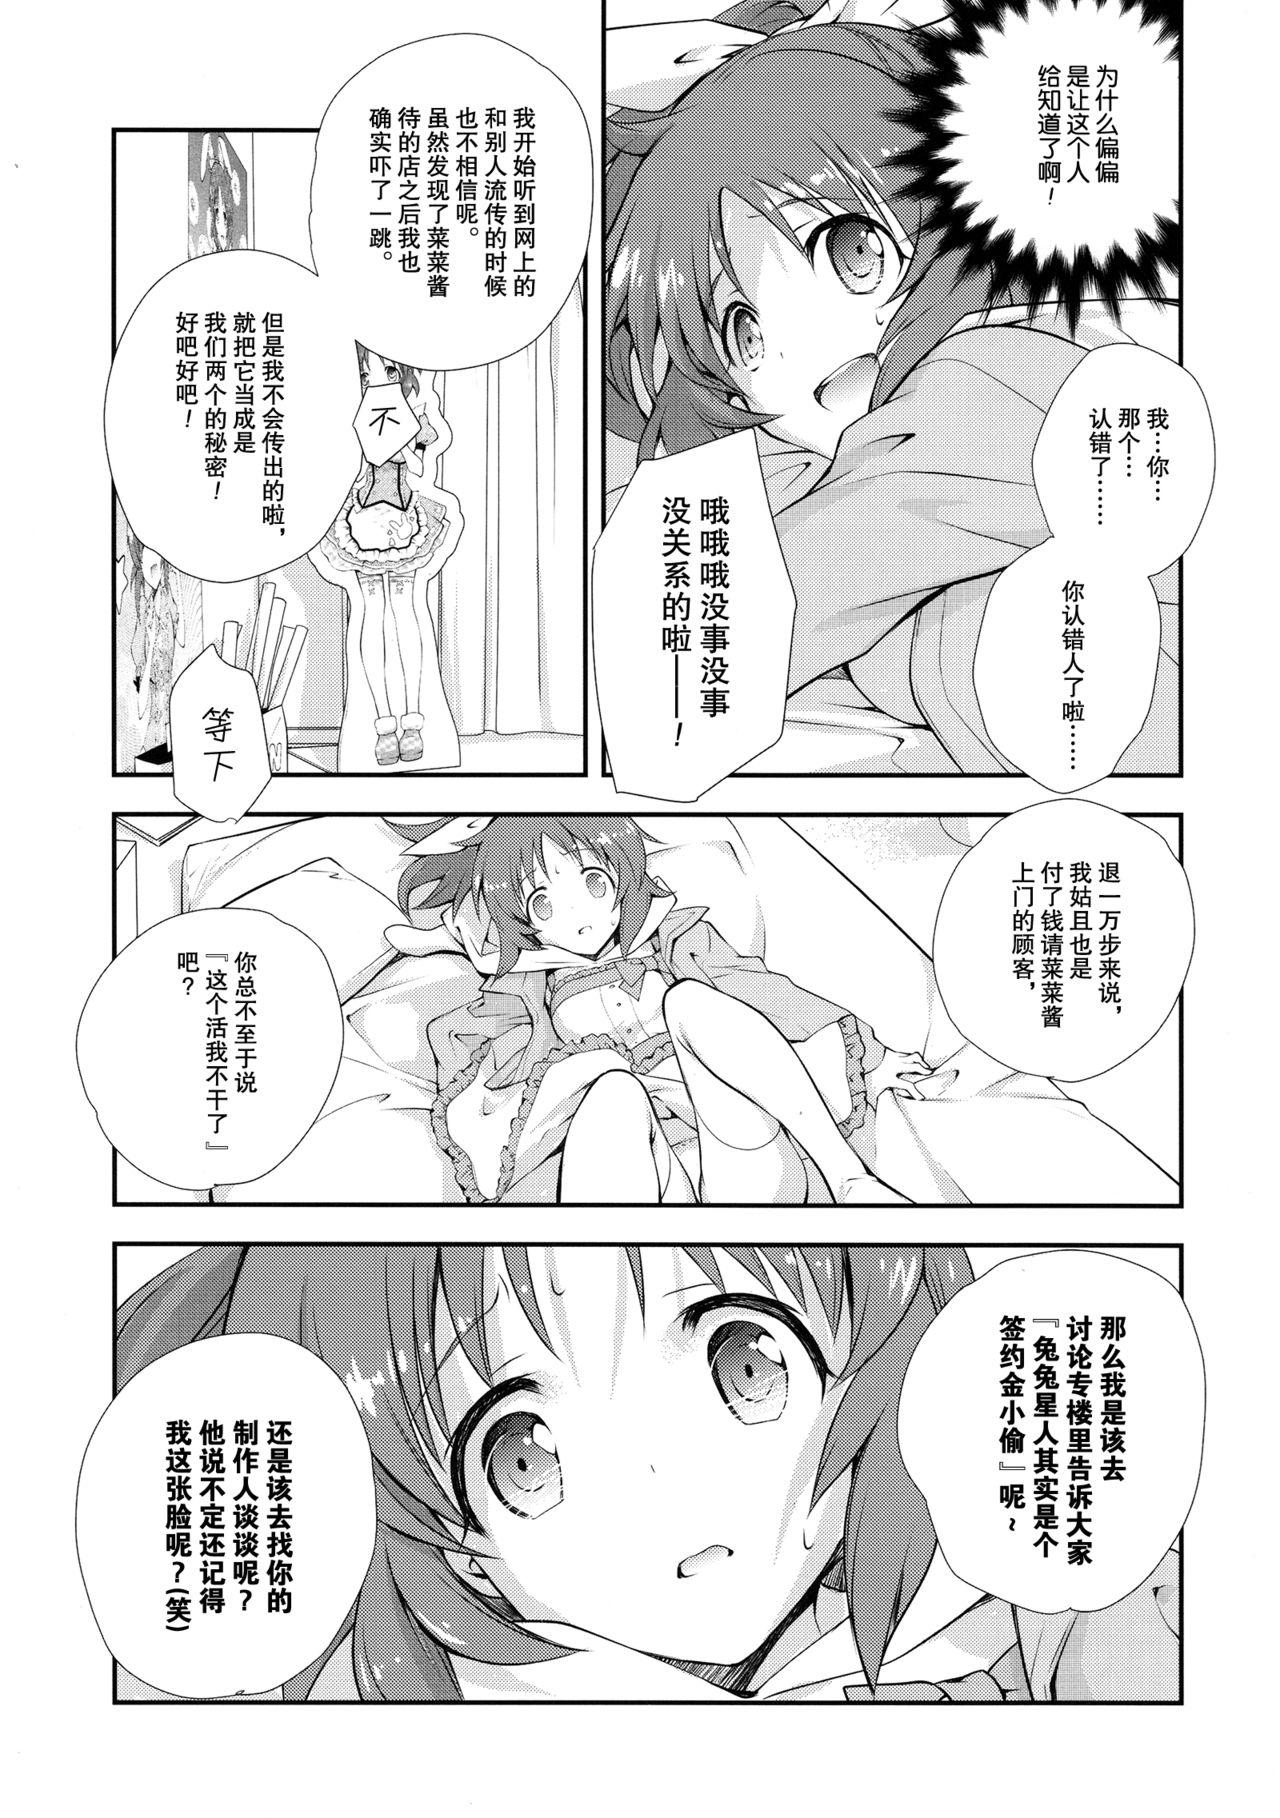 Spying USAMIN NO-LOAD - The idolmaster Bisex - Page 12